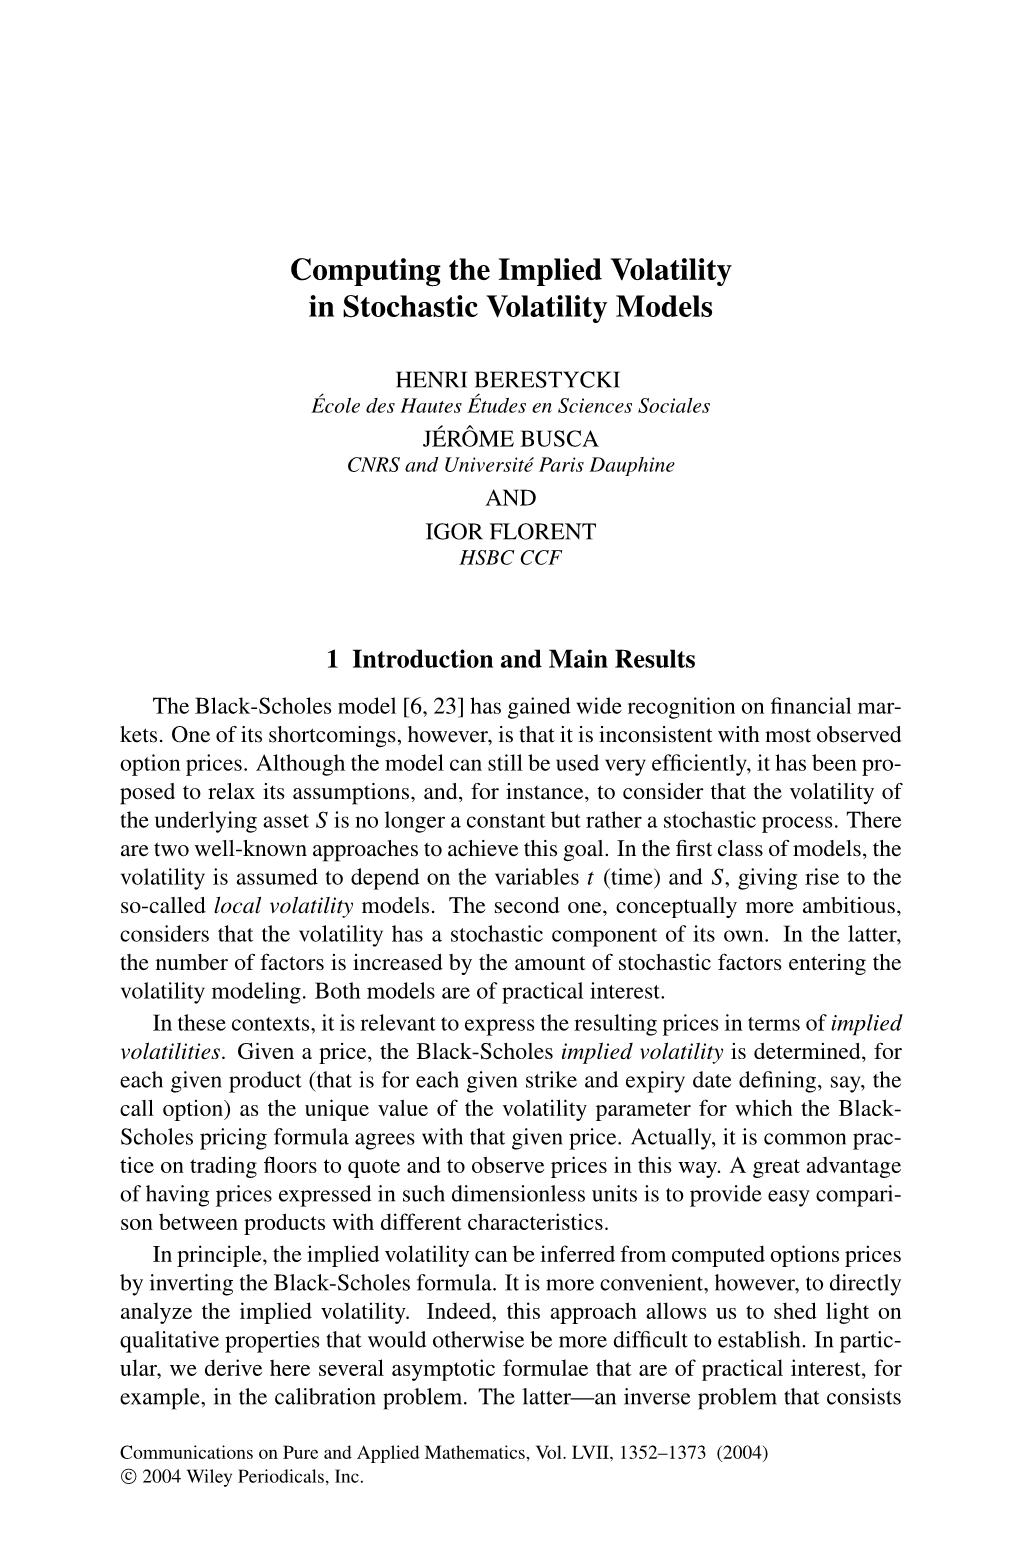 Computing the Implied Volatility in Stochastic Volatility Models